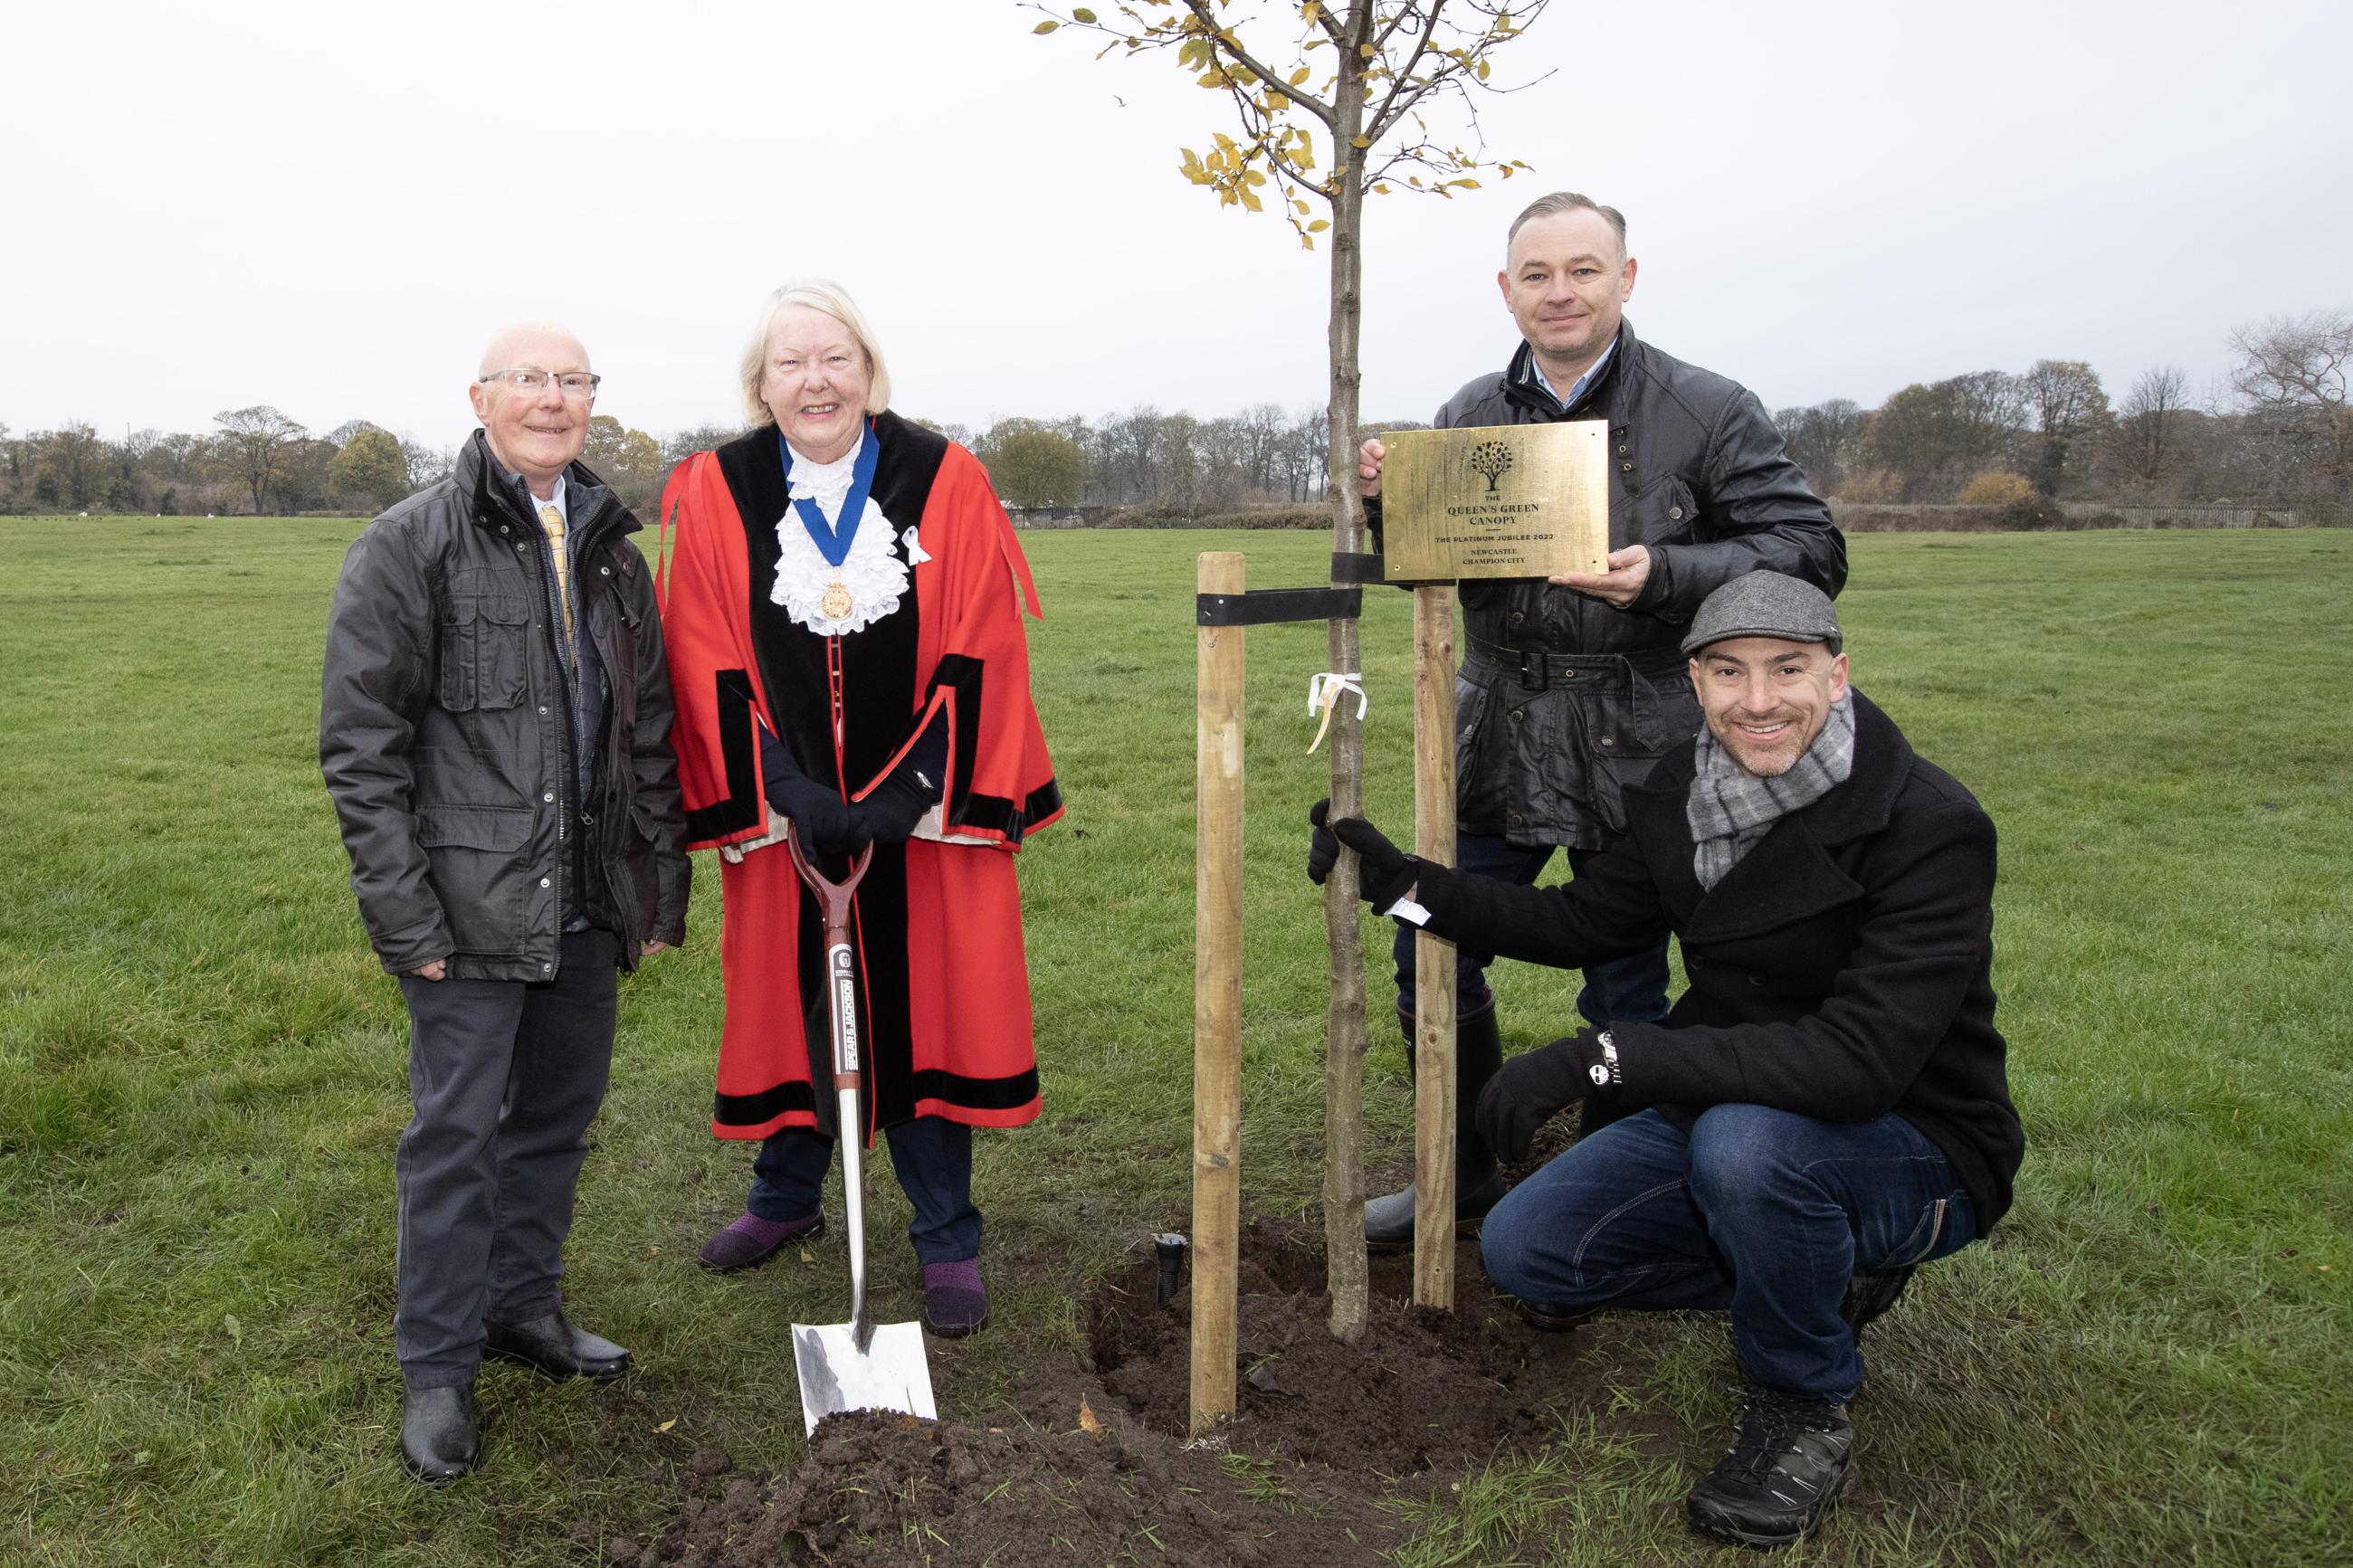 David Wilson, Chair of the Freemen of Newcastle upon Tyne, Sheriff and Deputy Lord Mayor, Councillor Veronica Dunn, Nick Atkinson, Vice Chair of the Freemen of Newcastle, Lloyd Jones, Forest Manager, North East Community Forest